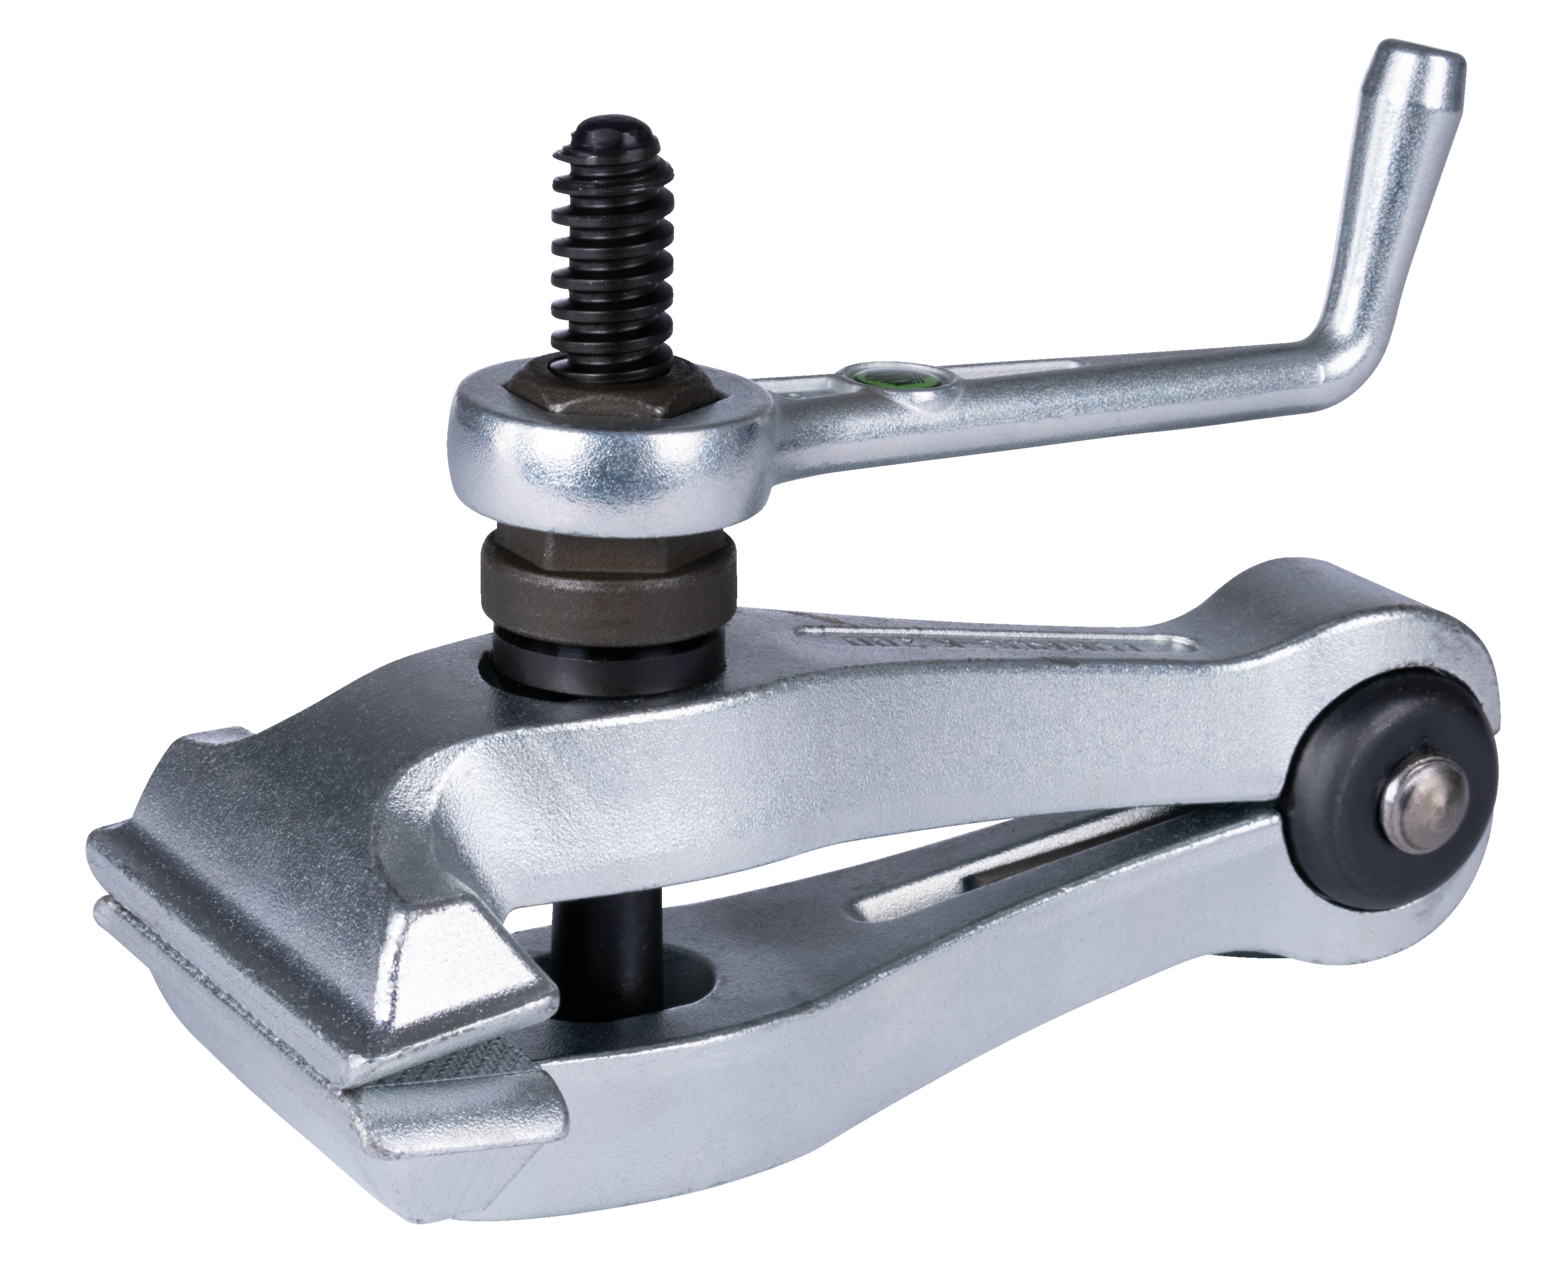 The hand filing block 107-200 for plumbers and fitters for clamping workpieces